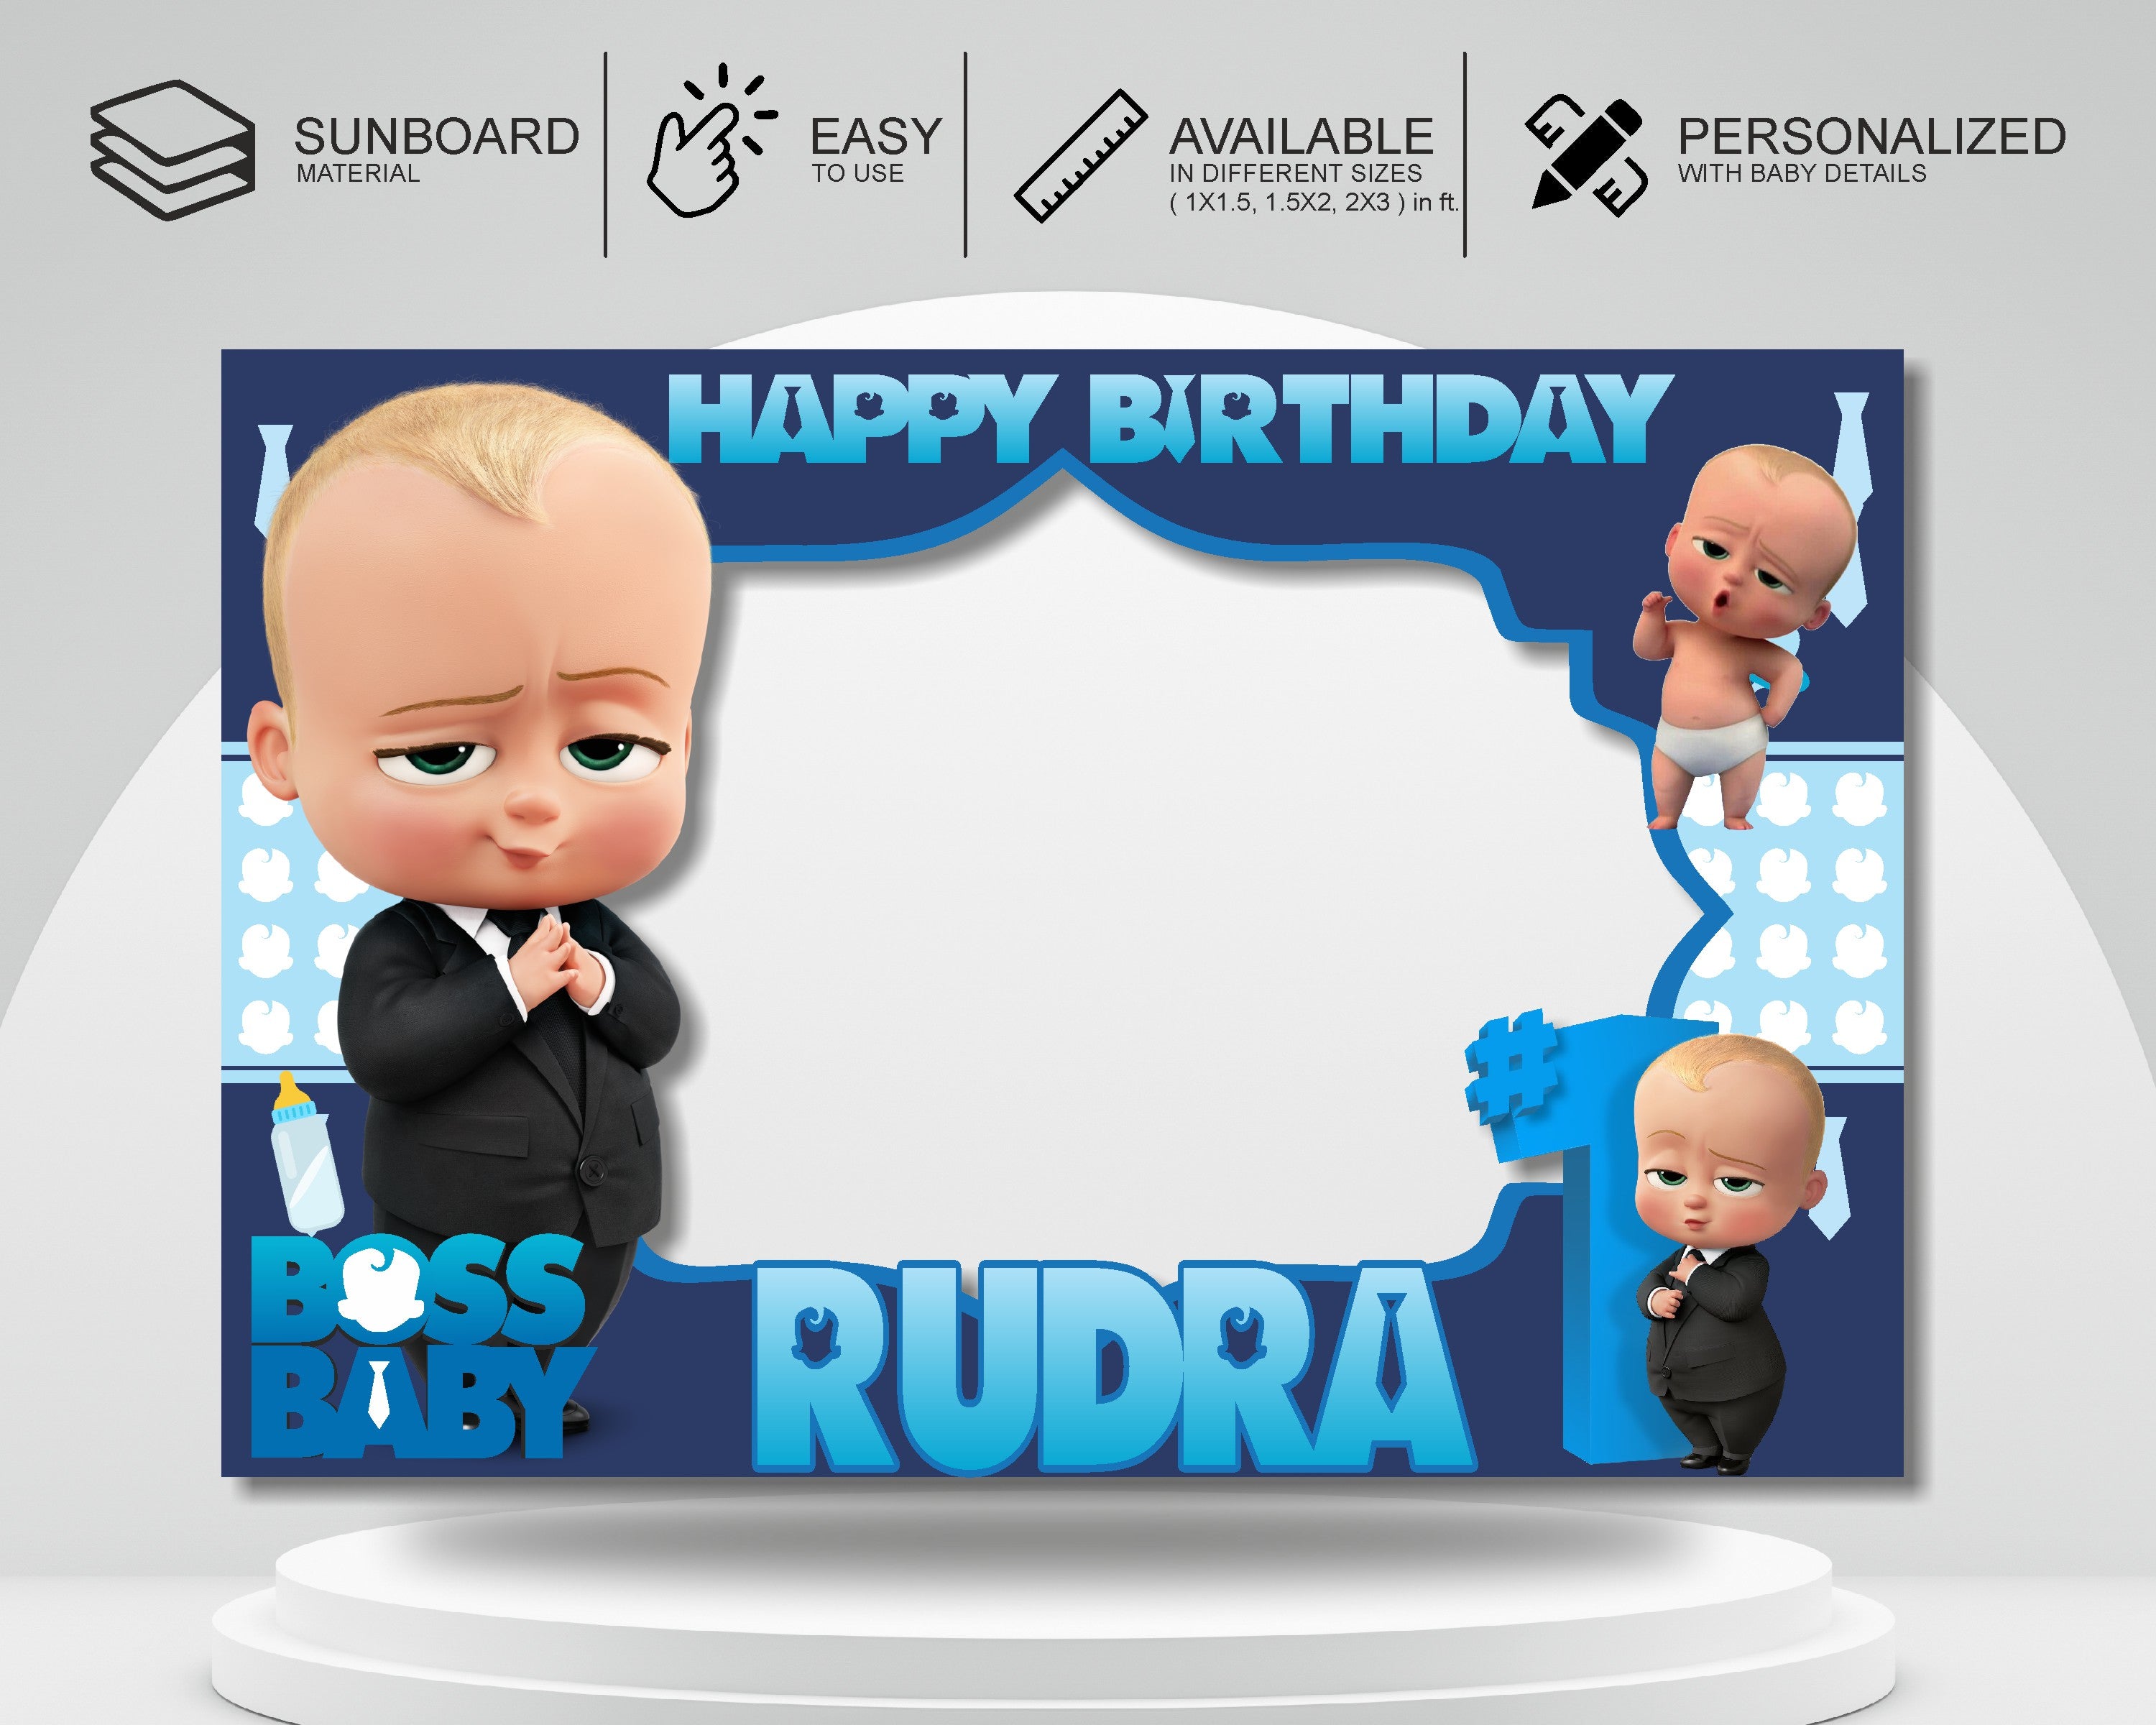 PSI Boss Baby Theme Personalized Photobooth